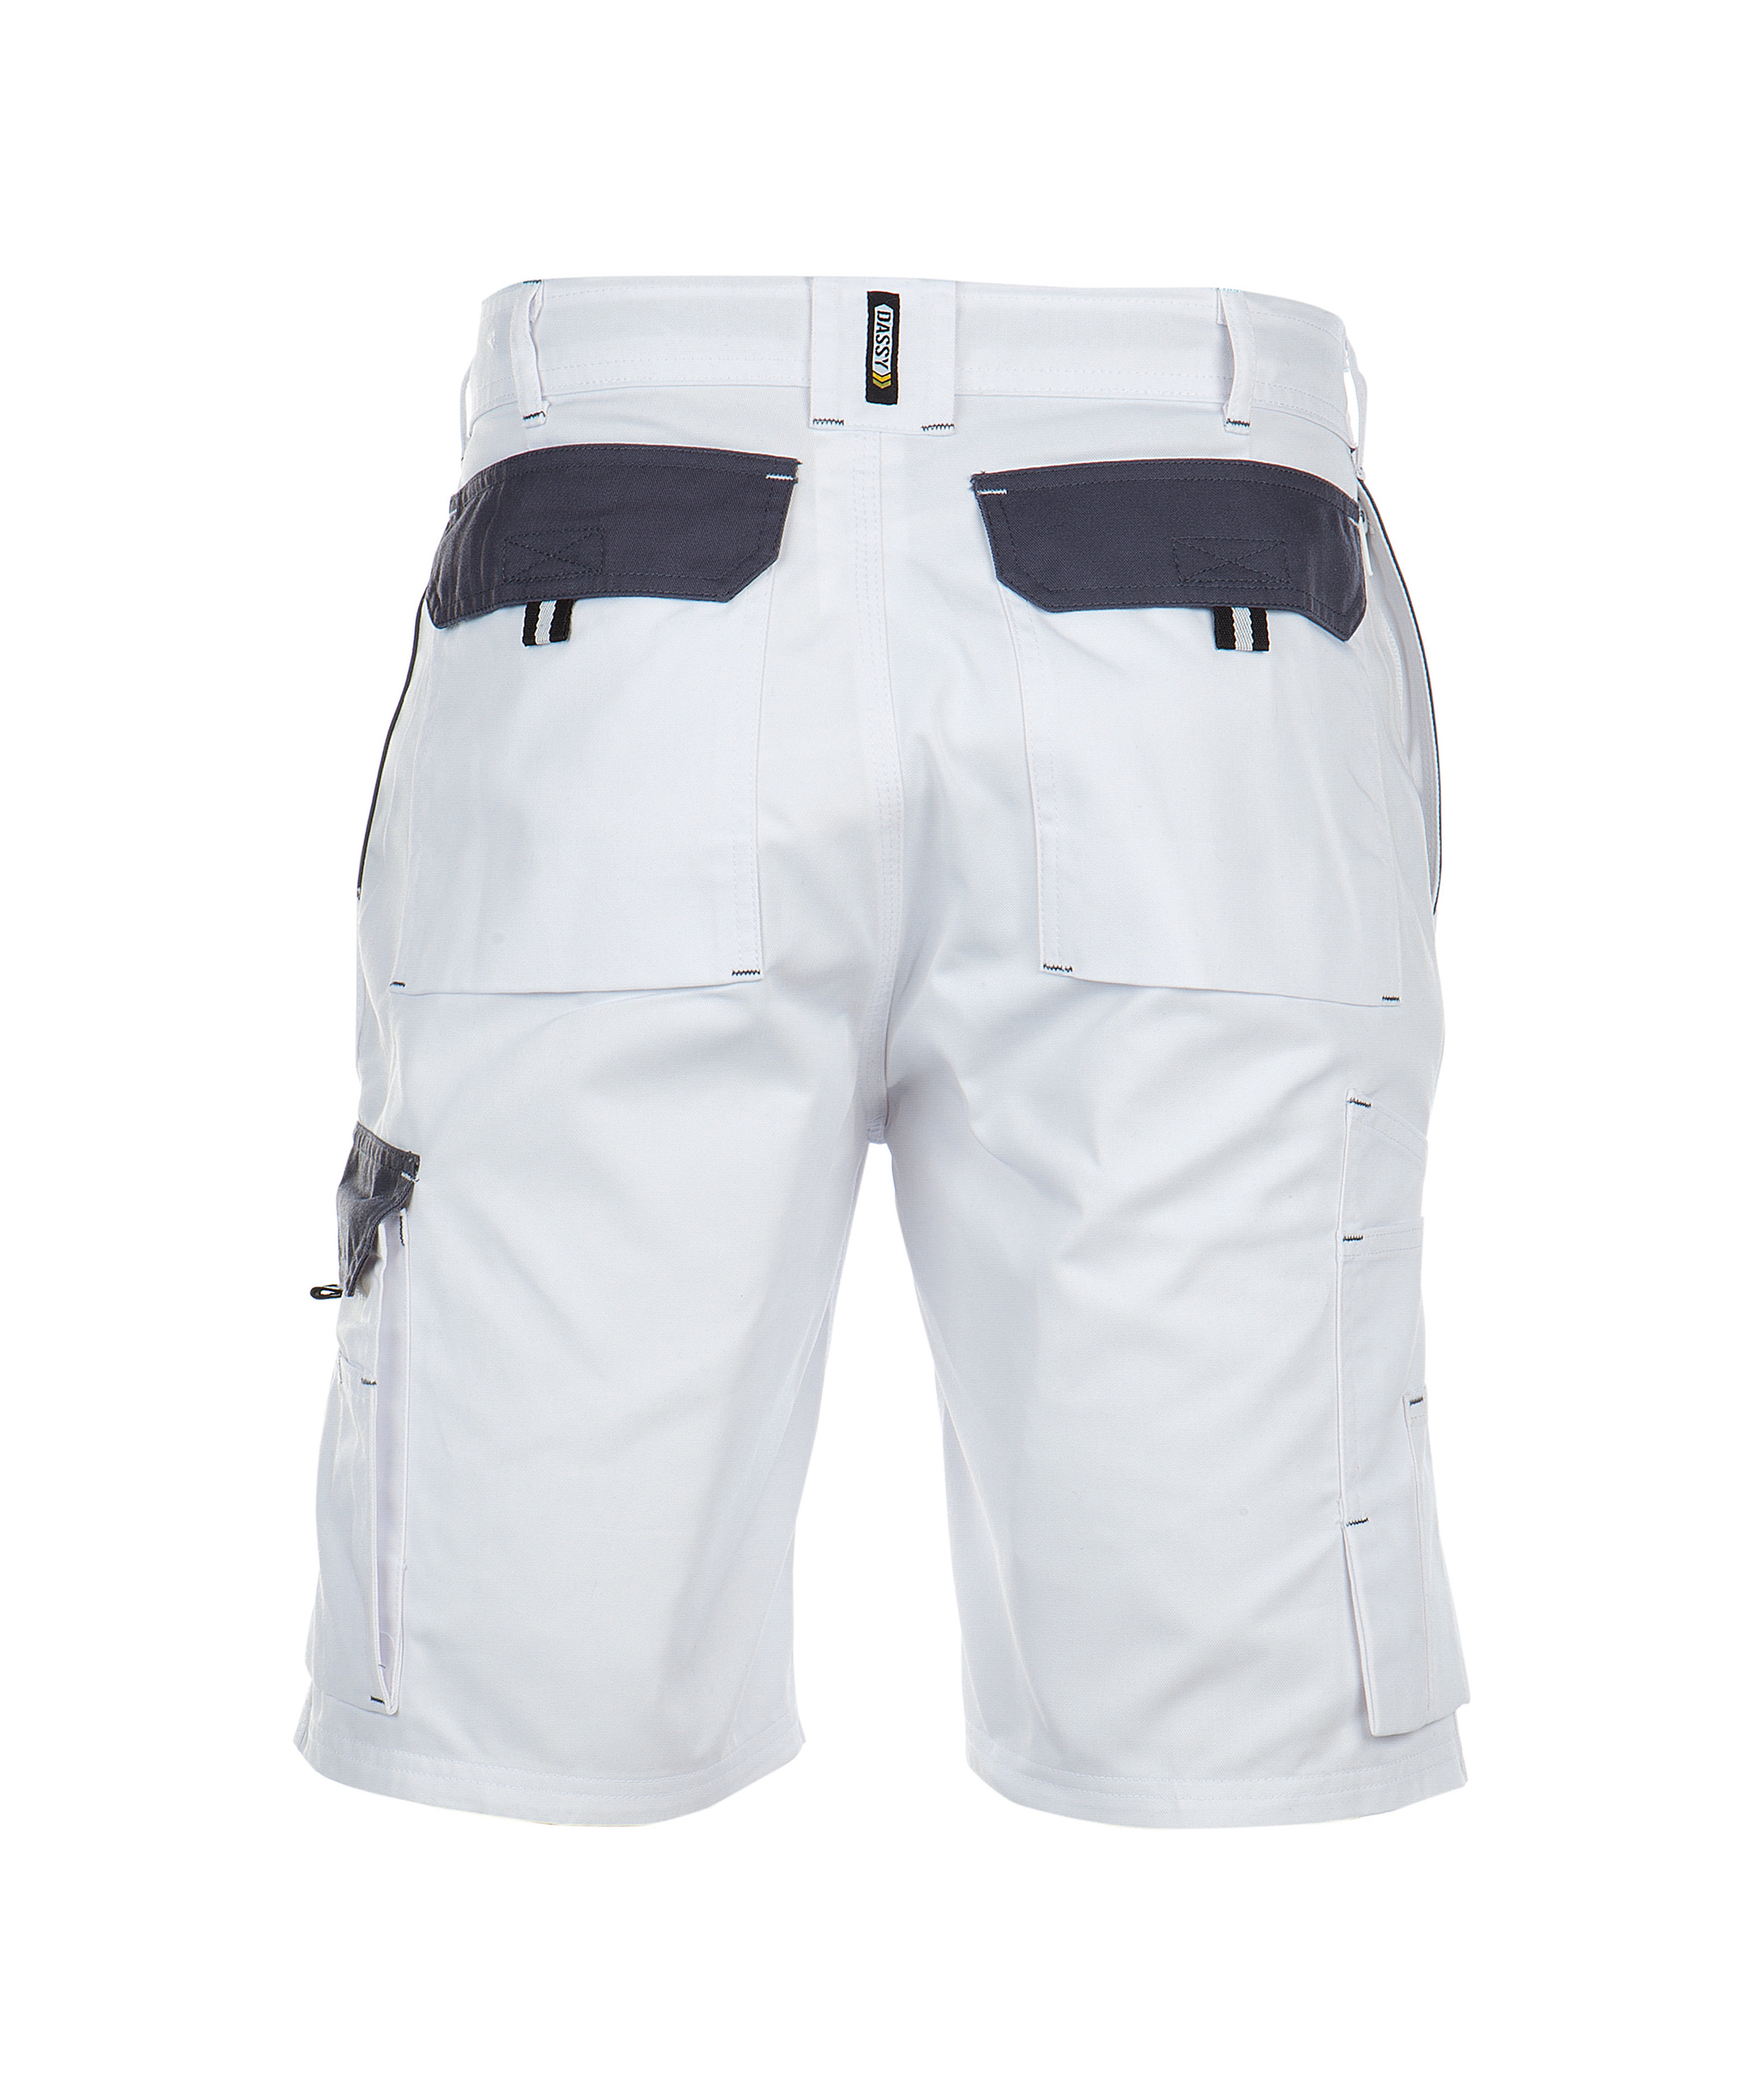 roma_two-tone-work-shorts_white-cement-grey_back.jpg